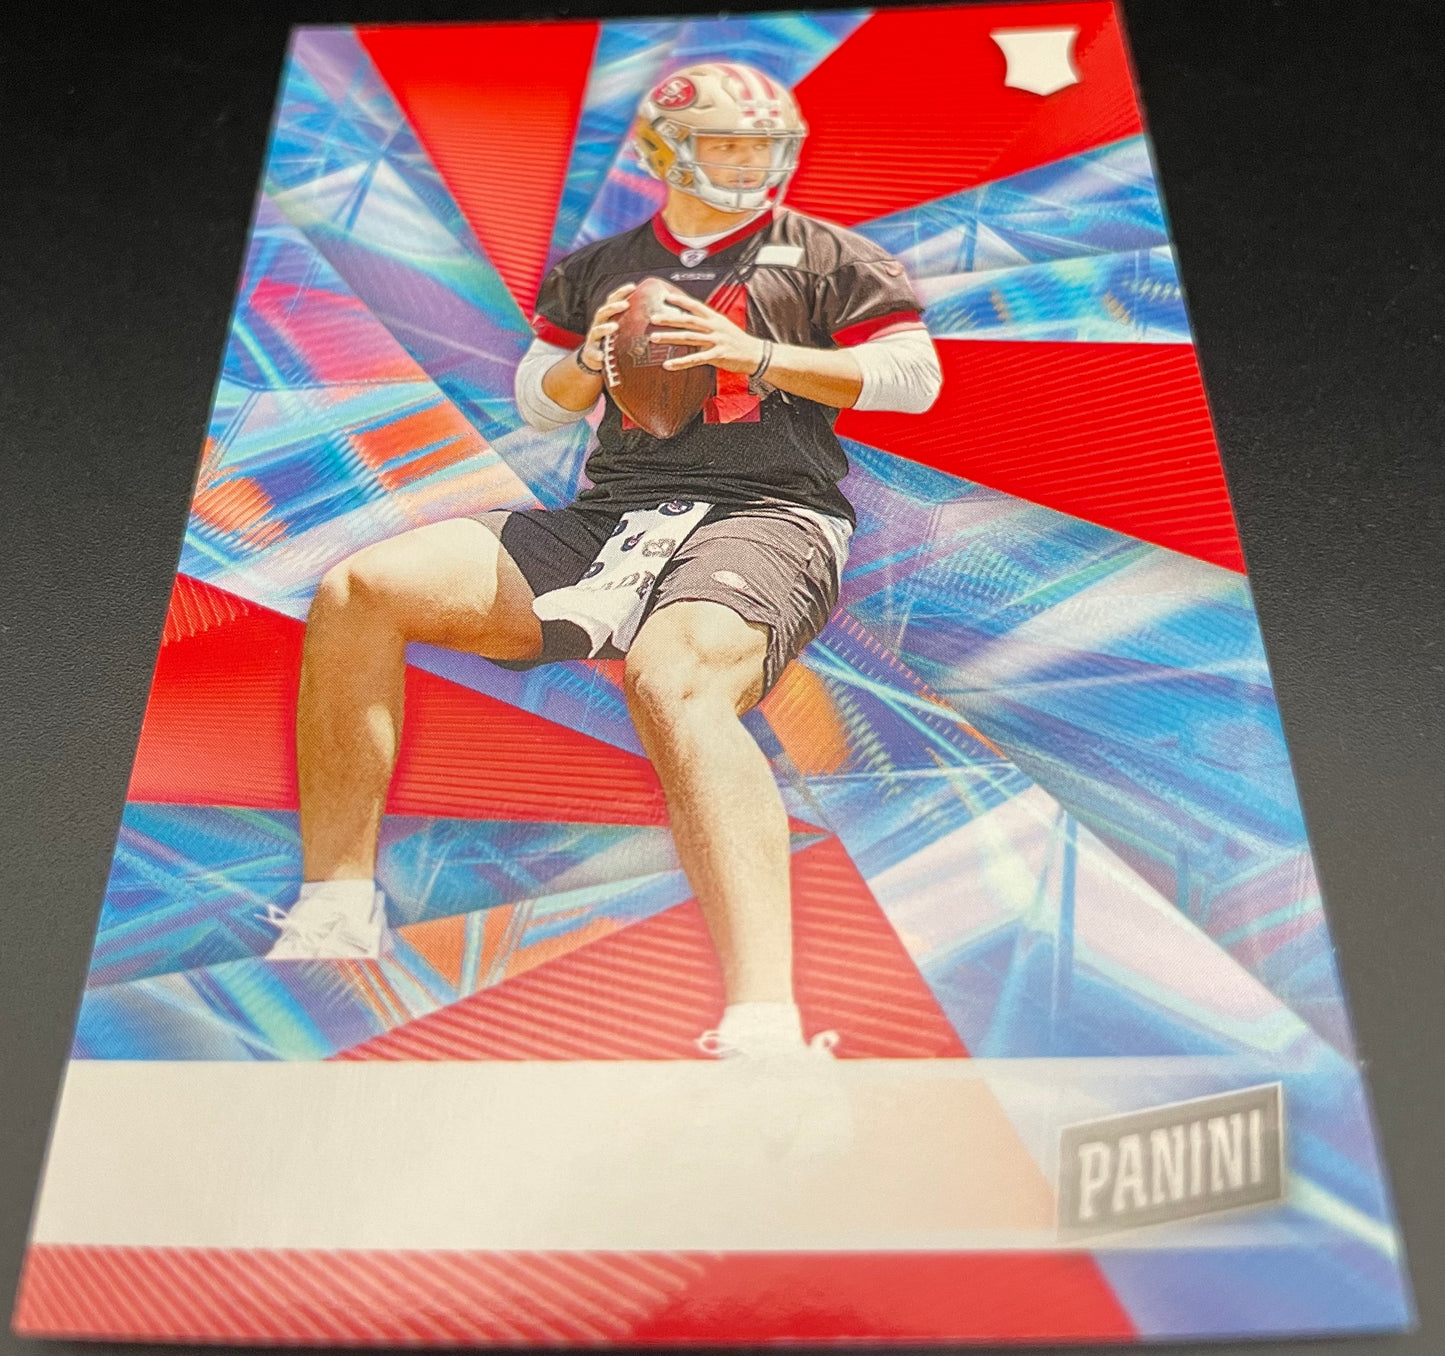 Brock Purdy 2022 Panini player of the day ERROR CARD NO NAME #58 San Francisco 49ers mr. irrelevant ￼￼